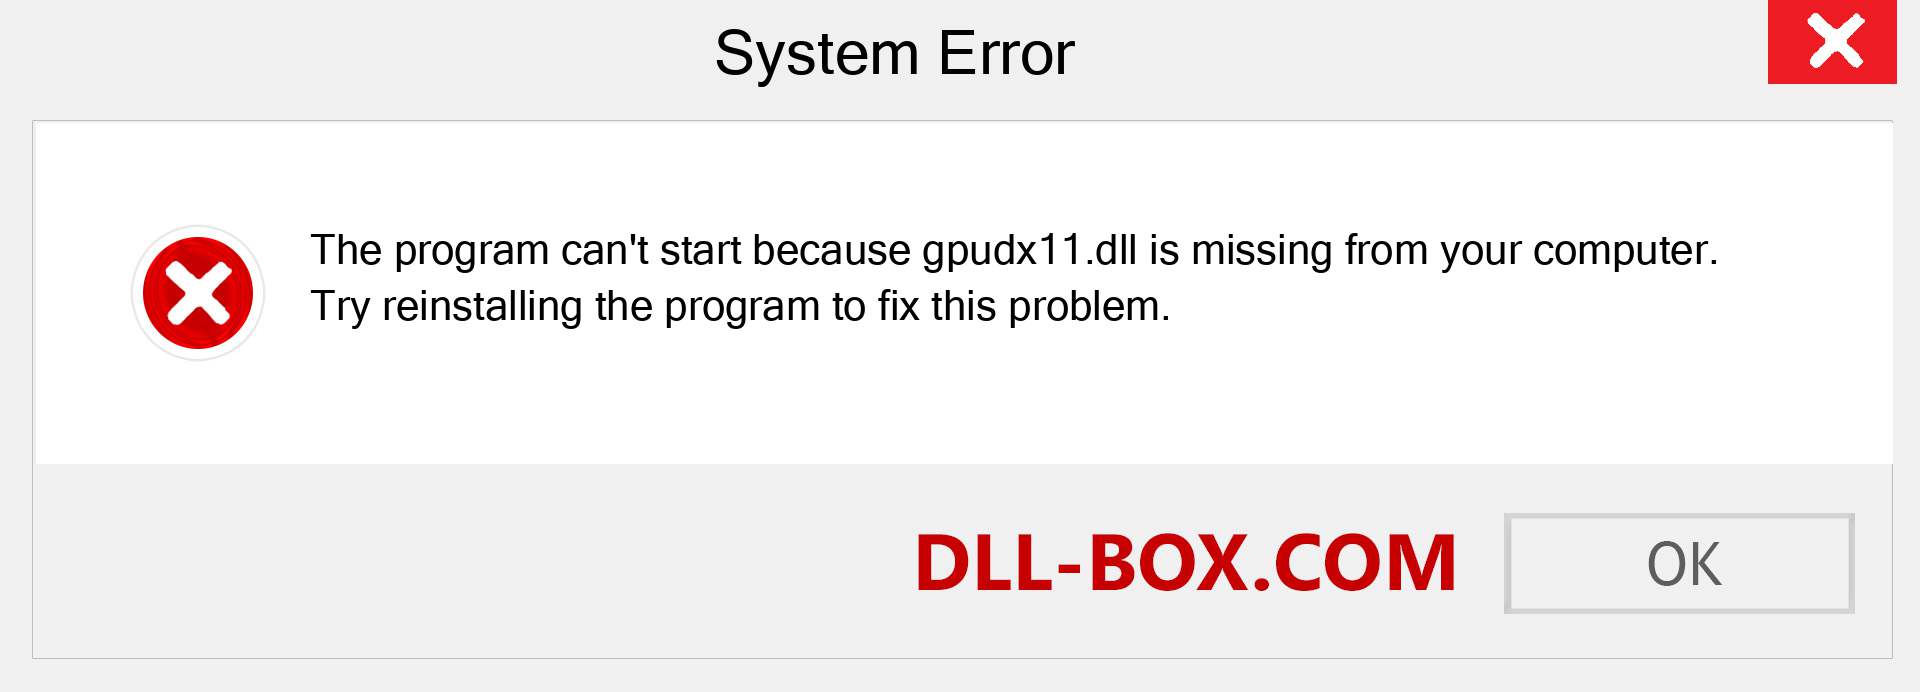  gpudx11.dll file is missing?. Download for Windows 7, 8, 10 - Fix  gpudx11 dll Missing Error on Windows, photos, images